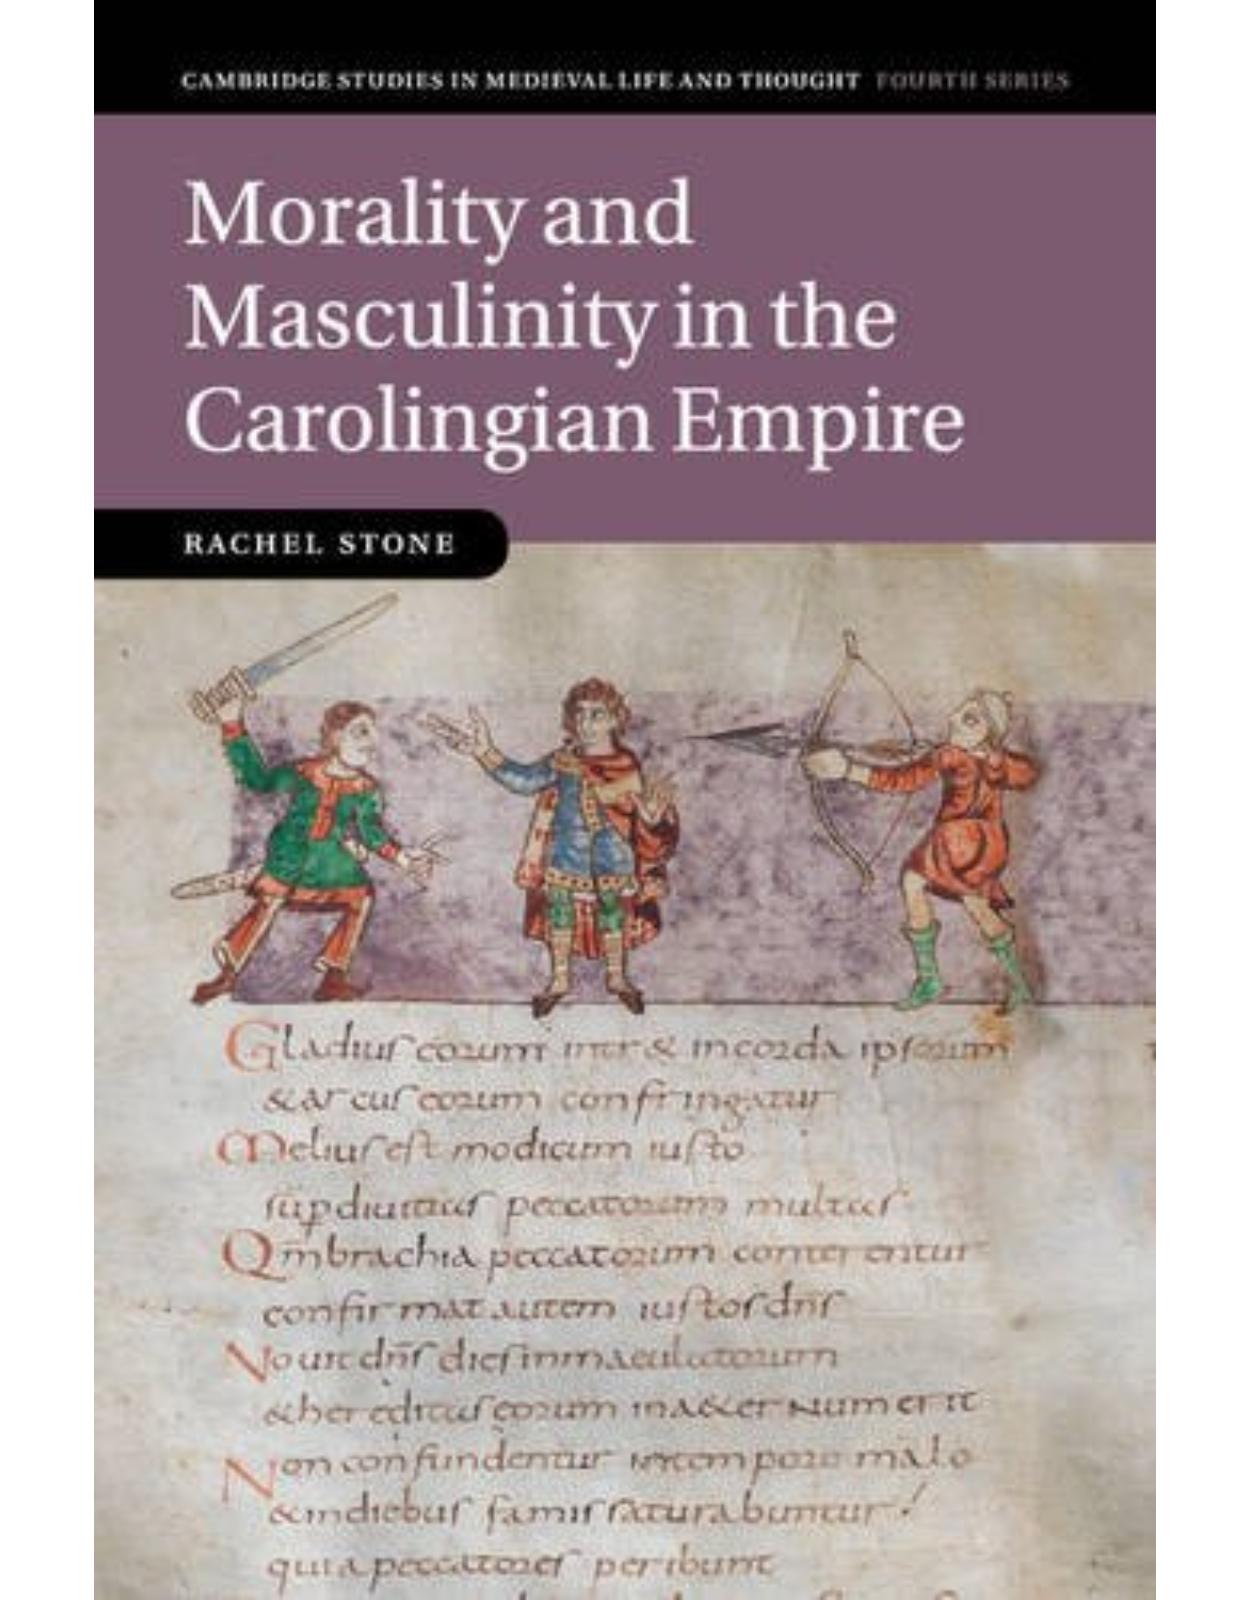 Morality and Masculinity in the Carolingian Empire (Cambridge Studies in Medieval Life and Thought: Fourth Series)